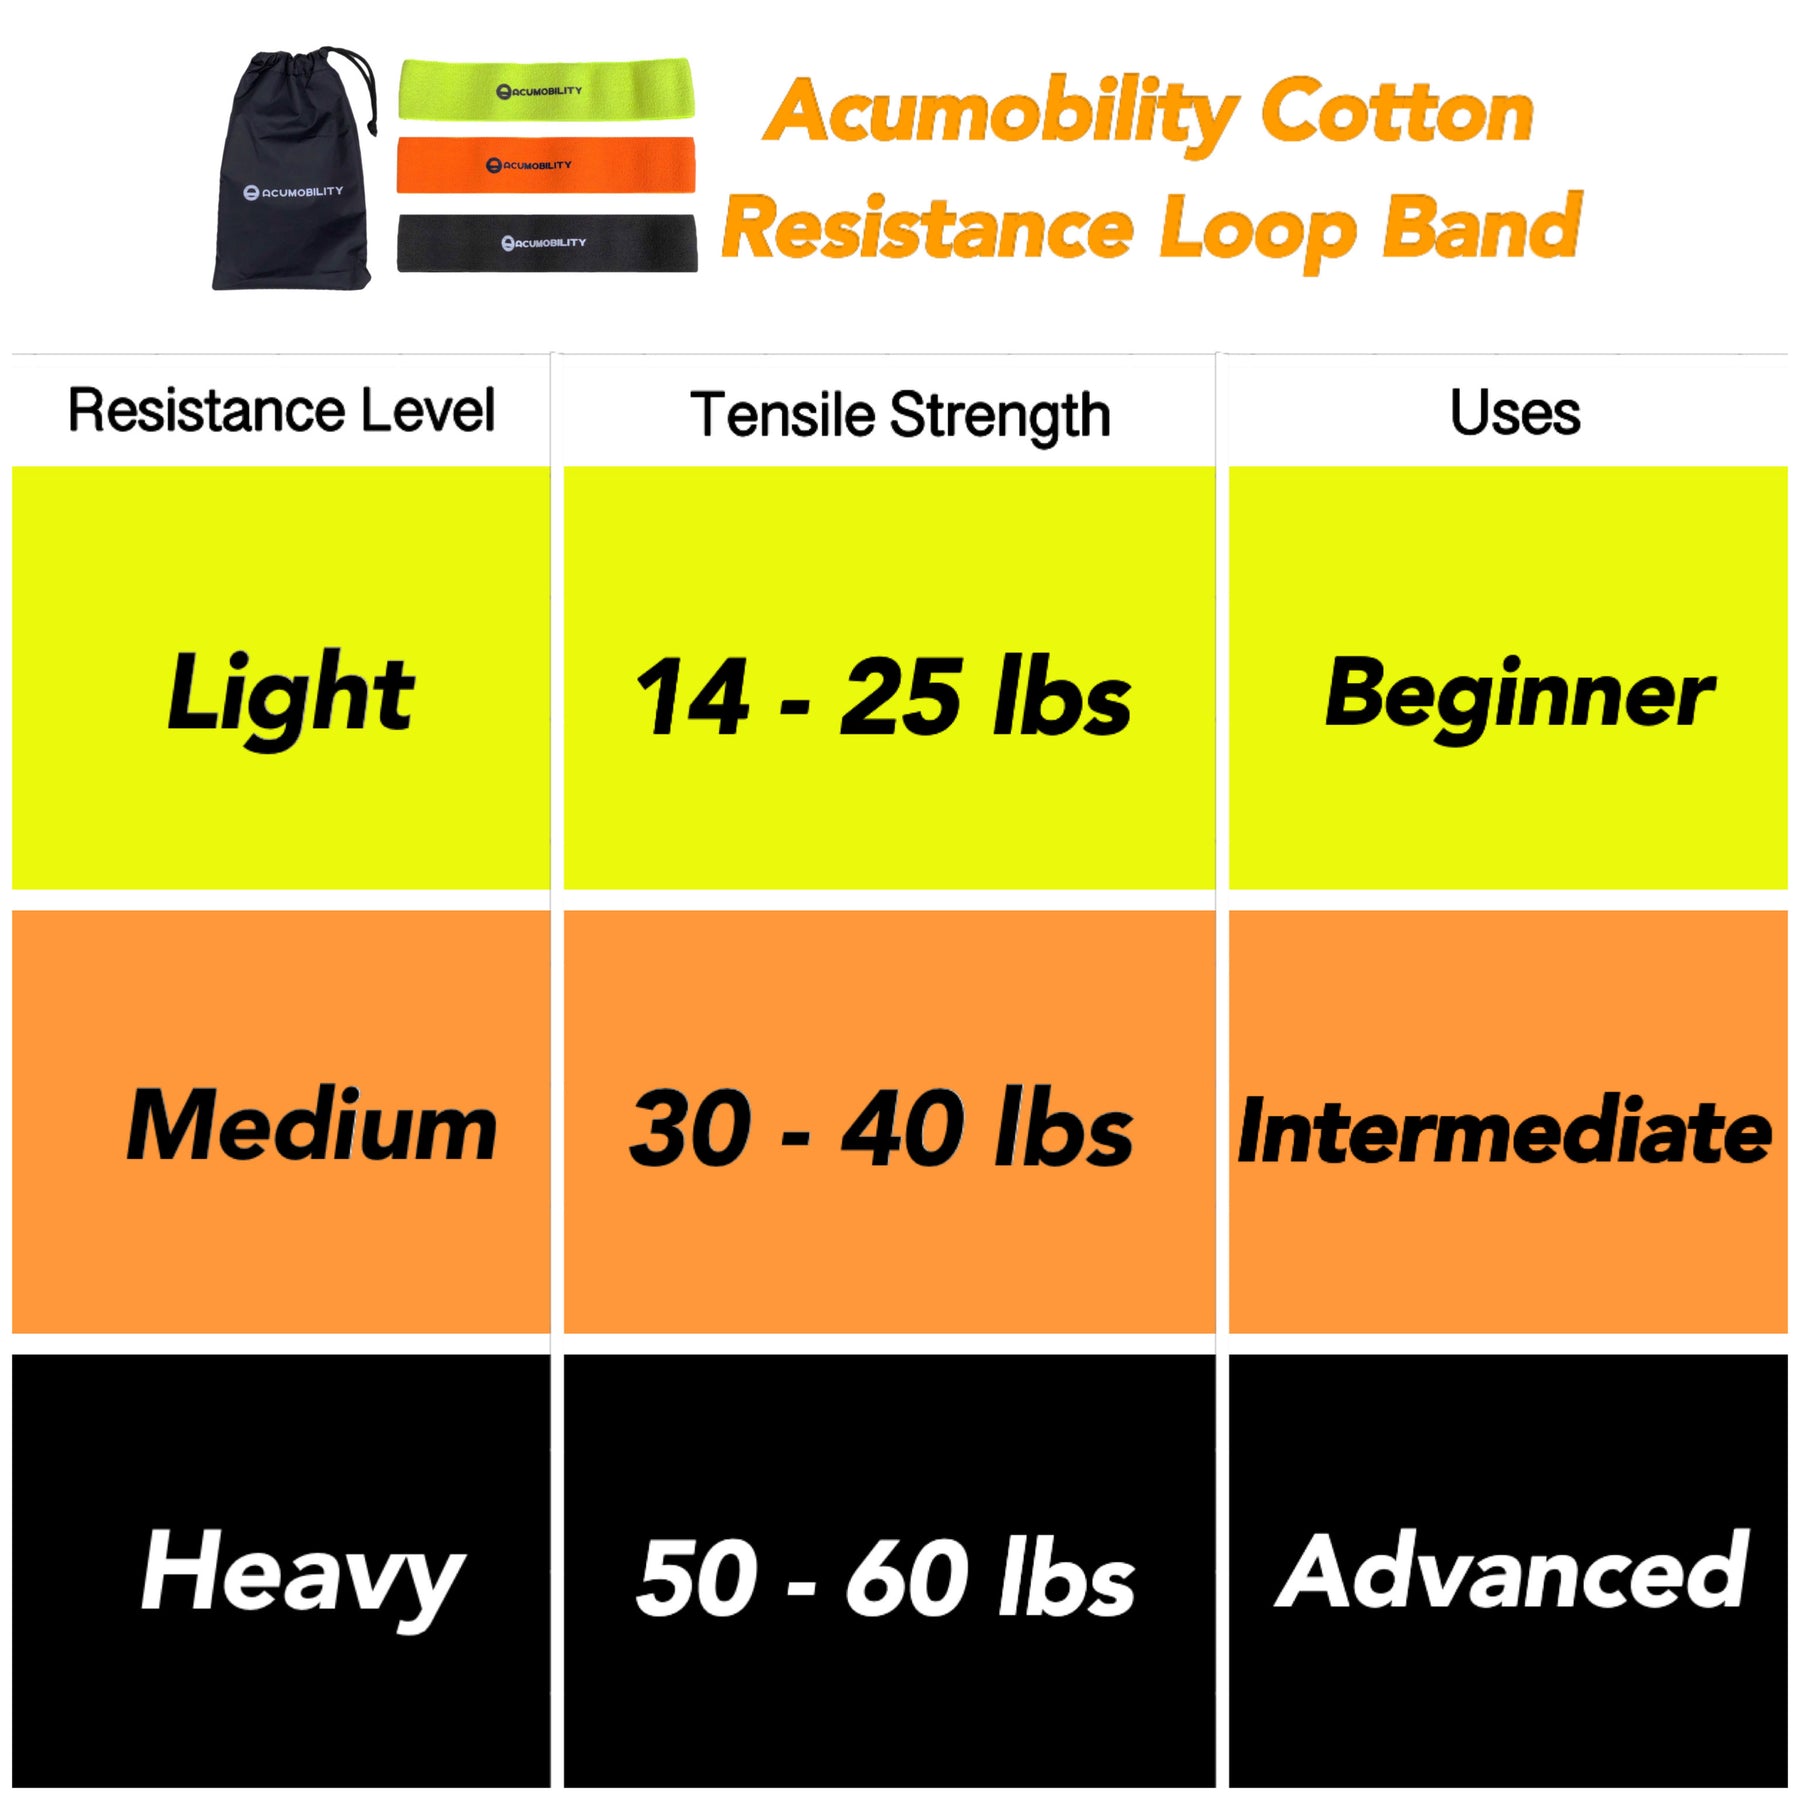 Wholesale - Acumobility Resistance Loop Bands (Pack of 3) - Increments of 4